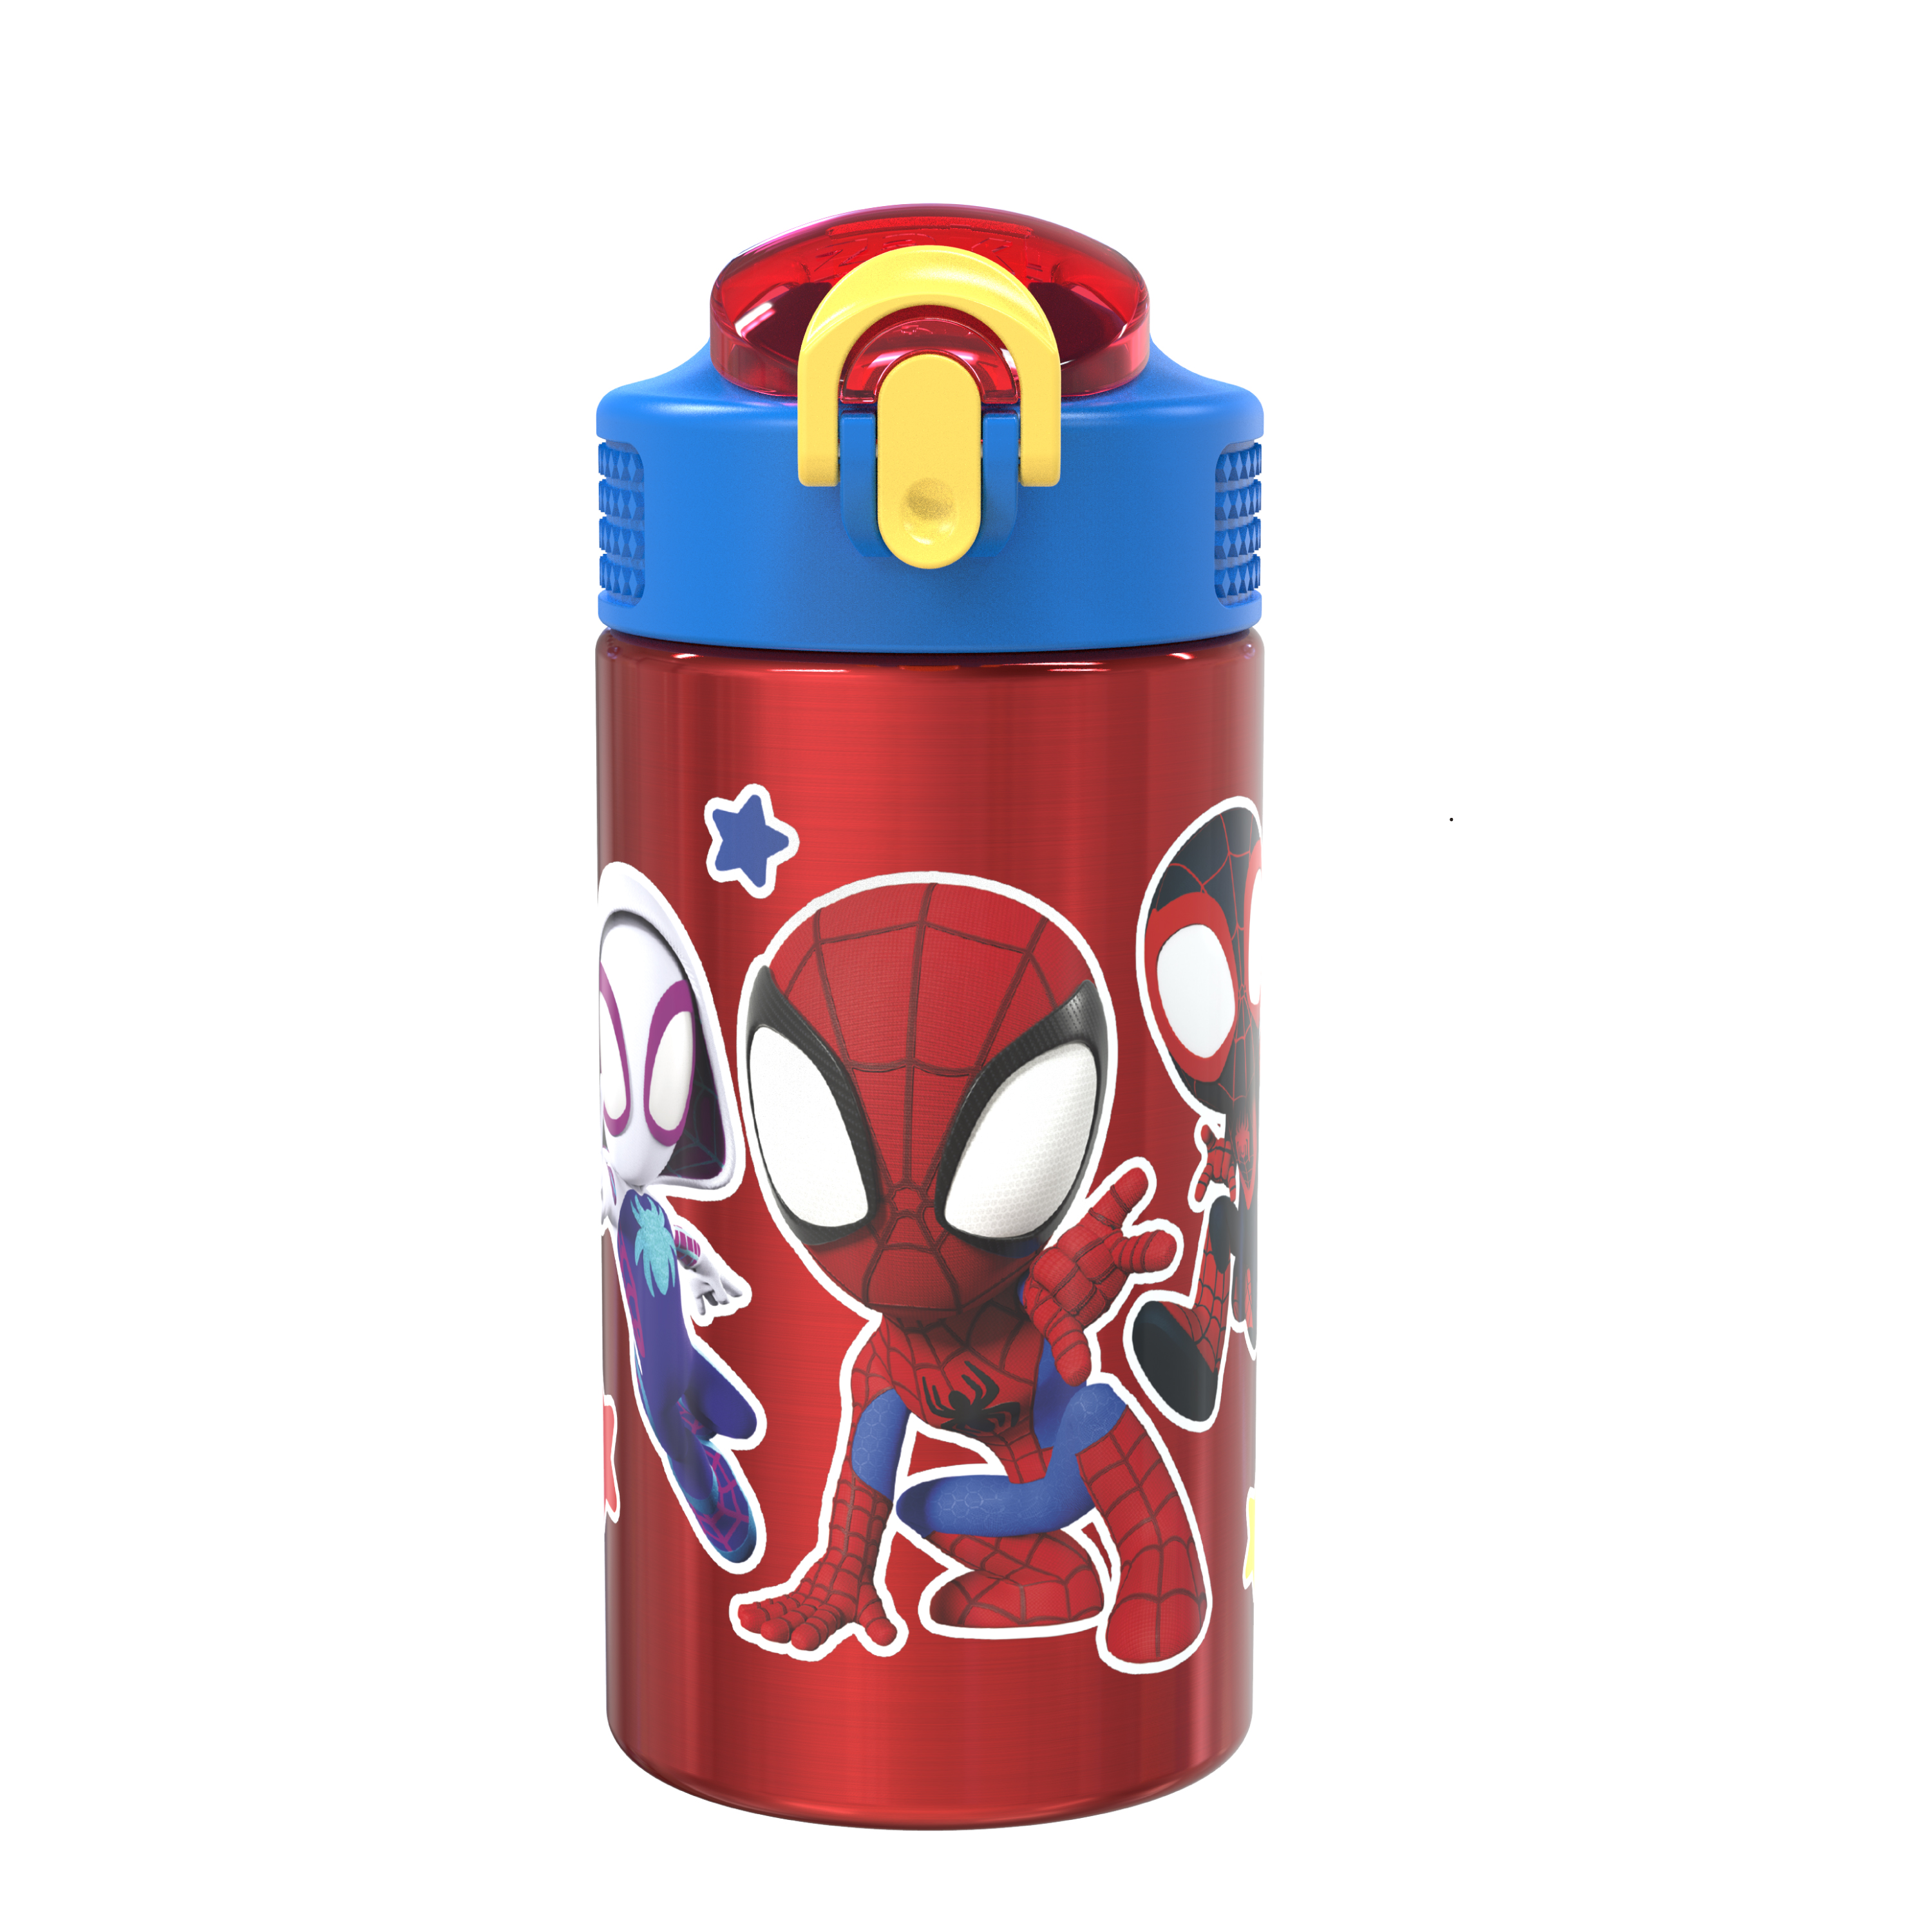 Spider-Man and His Amazing Friends 15.5 ounce Stainless Steel Water Bottle with Carrying Loop and Screw-on Lid, Spider-Friends slideshow image 1